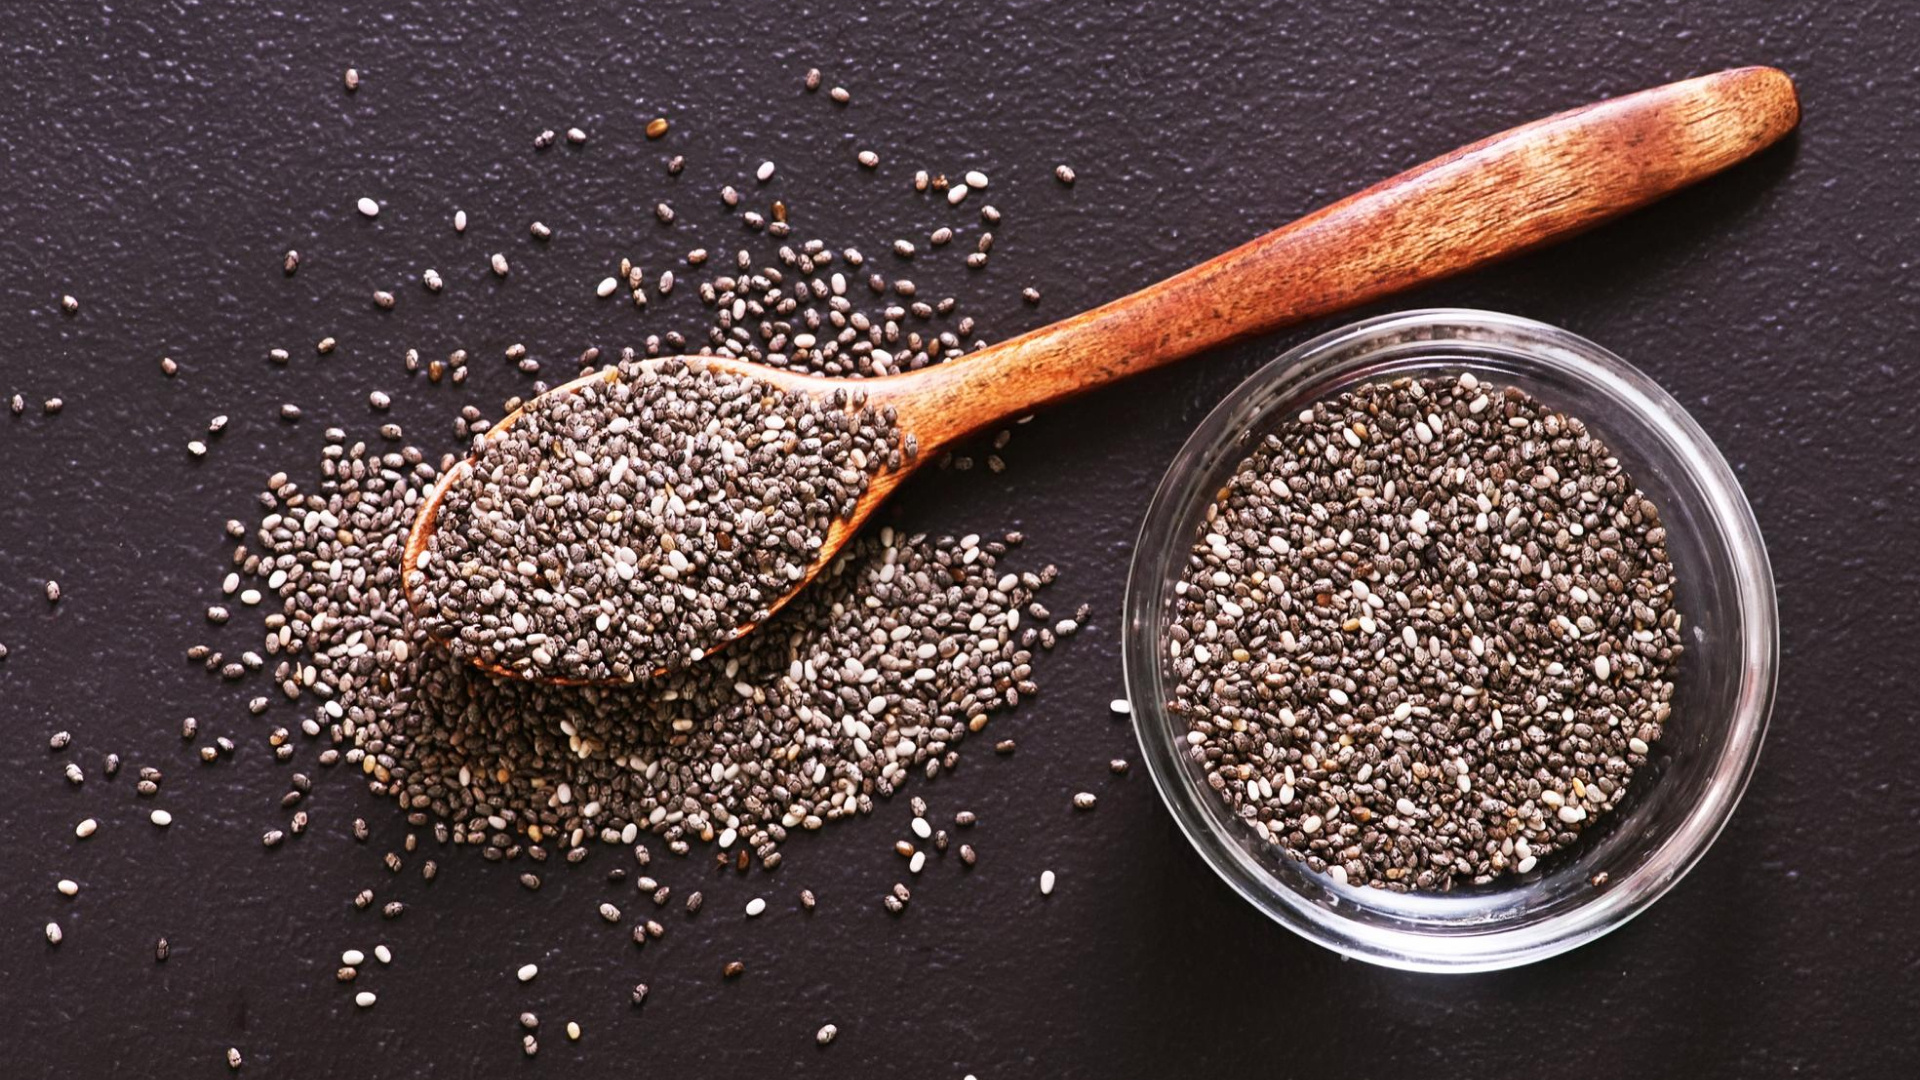 Chia seeds all you need, Vegan nutrition, Healthy and delicious, Plant-powered diet, 1920x1080 Full HD Desktop